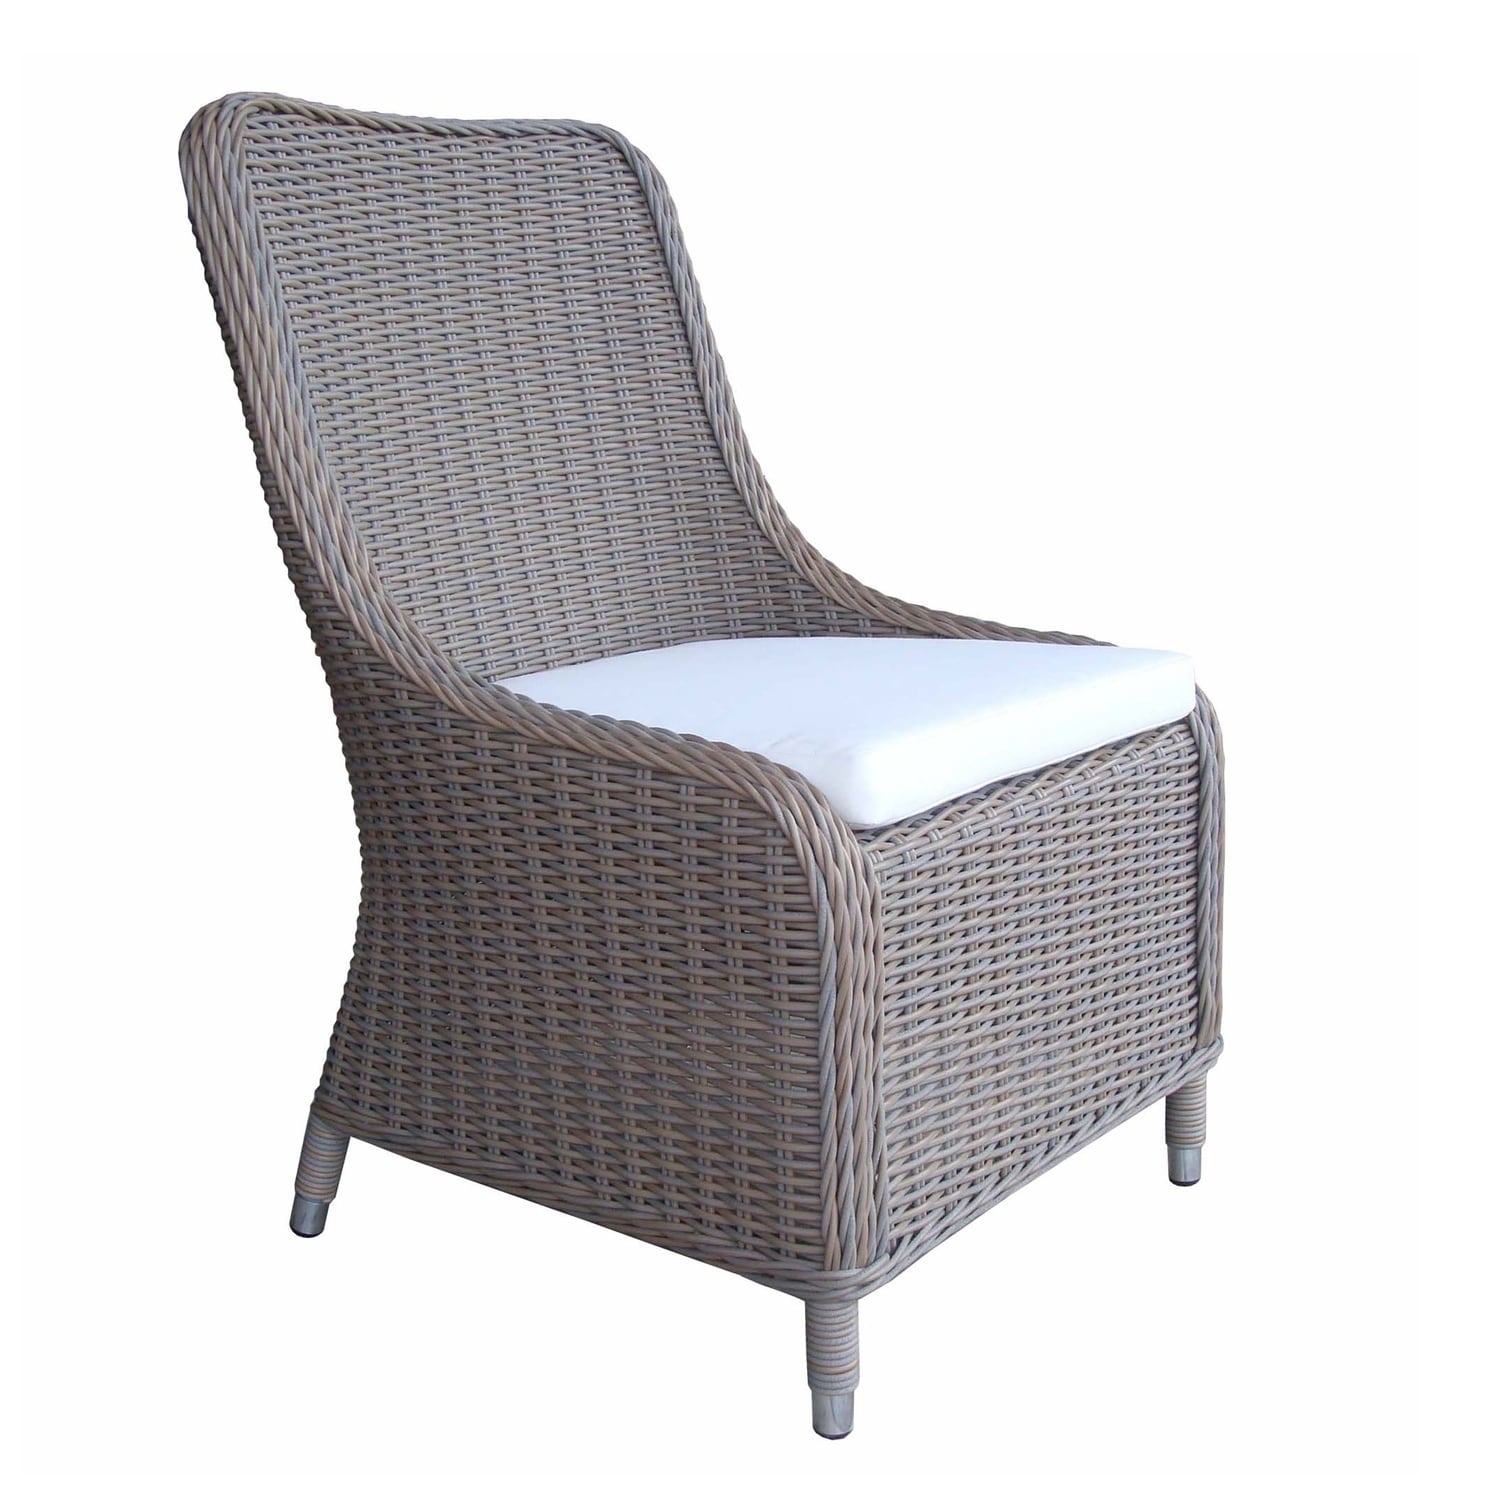 Shop Padma S Plantation Nautilus All Weather Wicker Outdoor Dining Chair Overstock 16849582